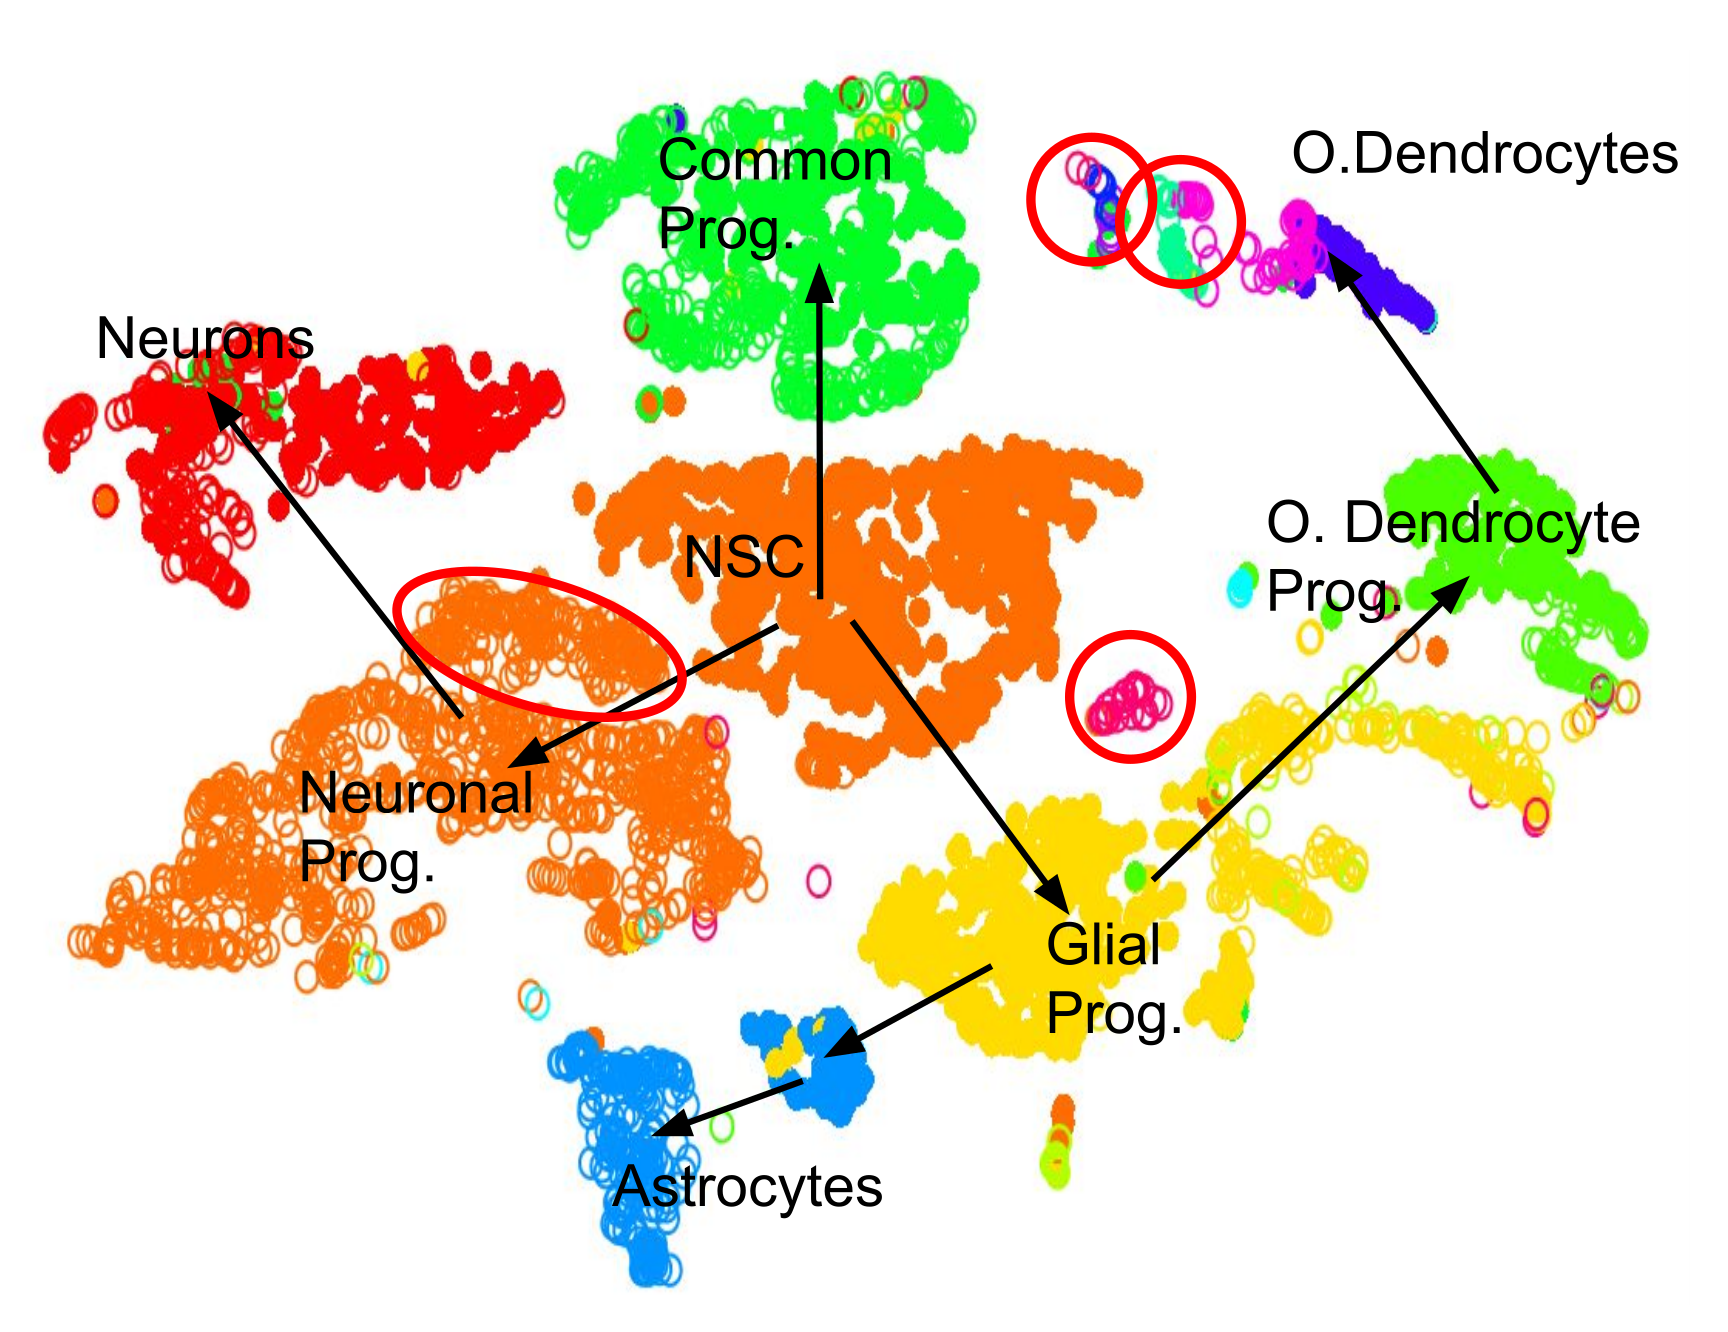 The same labelled graph, but now arrows connect the next nearest groups of cell types.